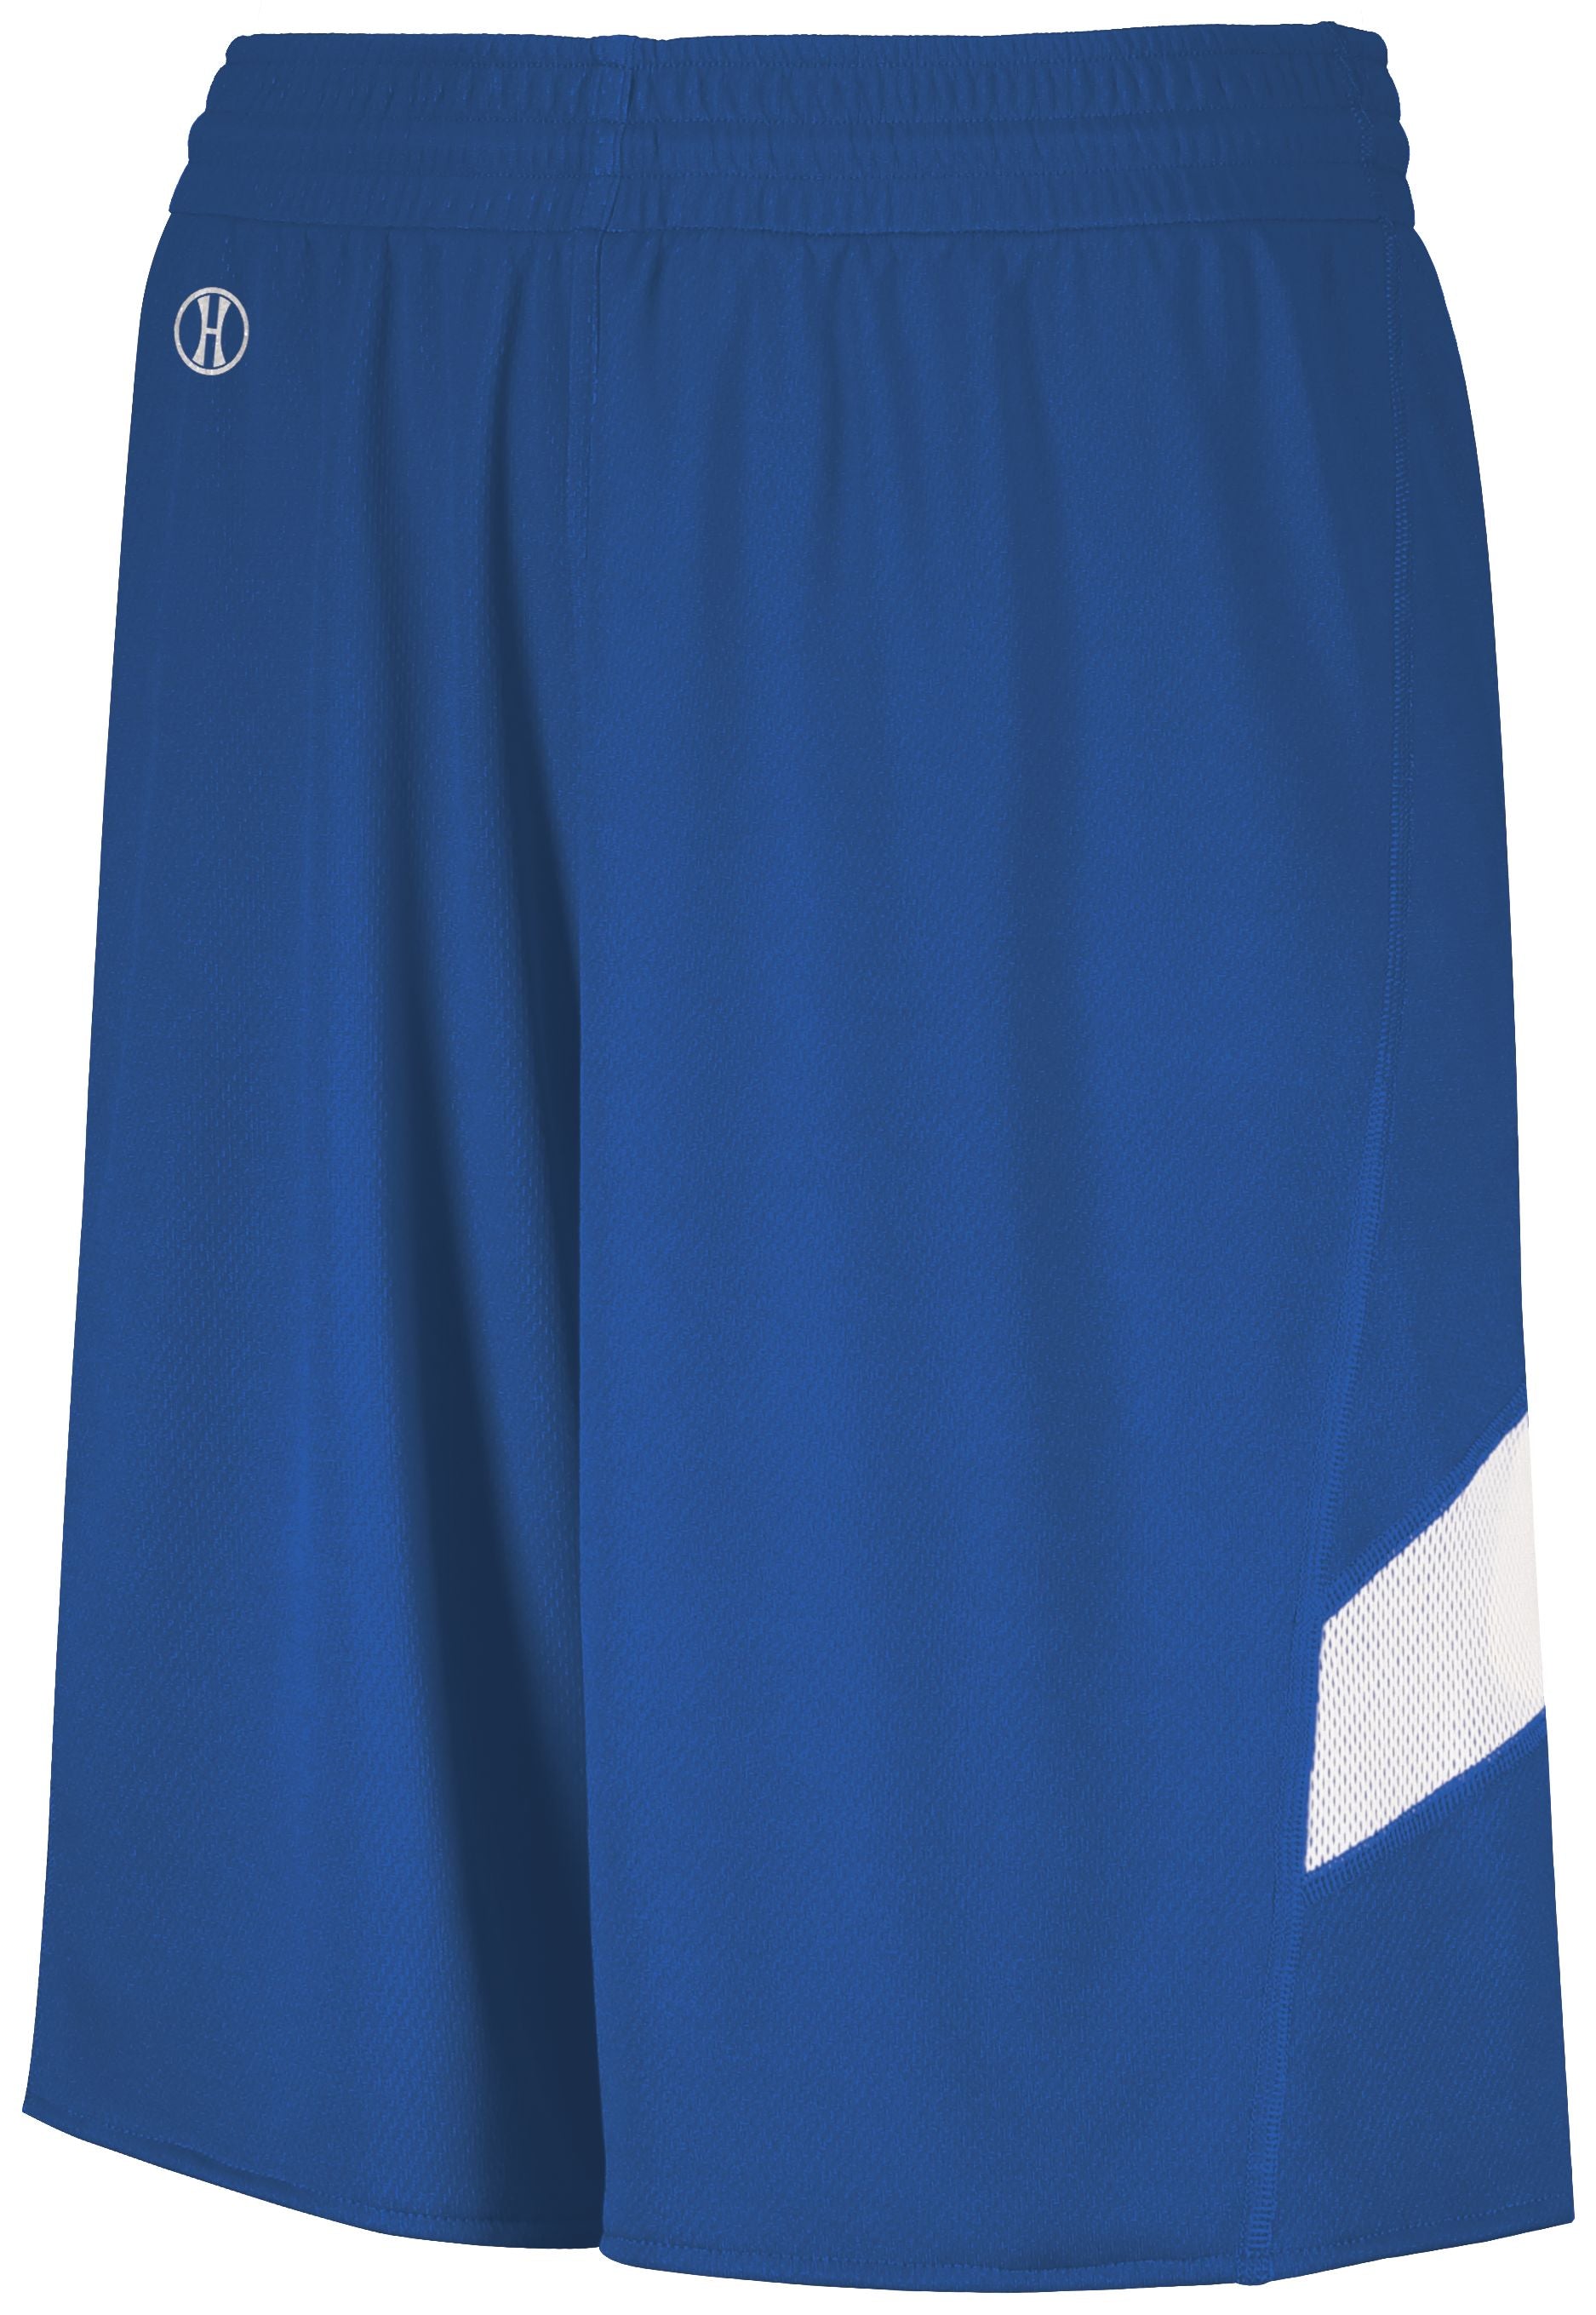 Holloway Dual-Side Single Ply Shorts in Royal/White  -Part of the Adult, Adult-Shorts, Basketball, Holloway, All-Sports, All-Sports-1 product lines at KanaleyCreations.com